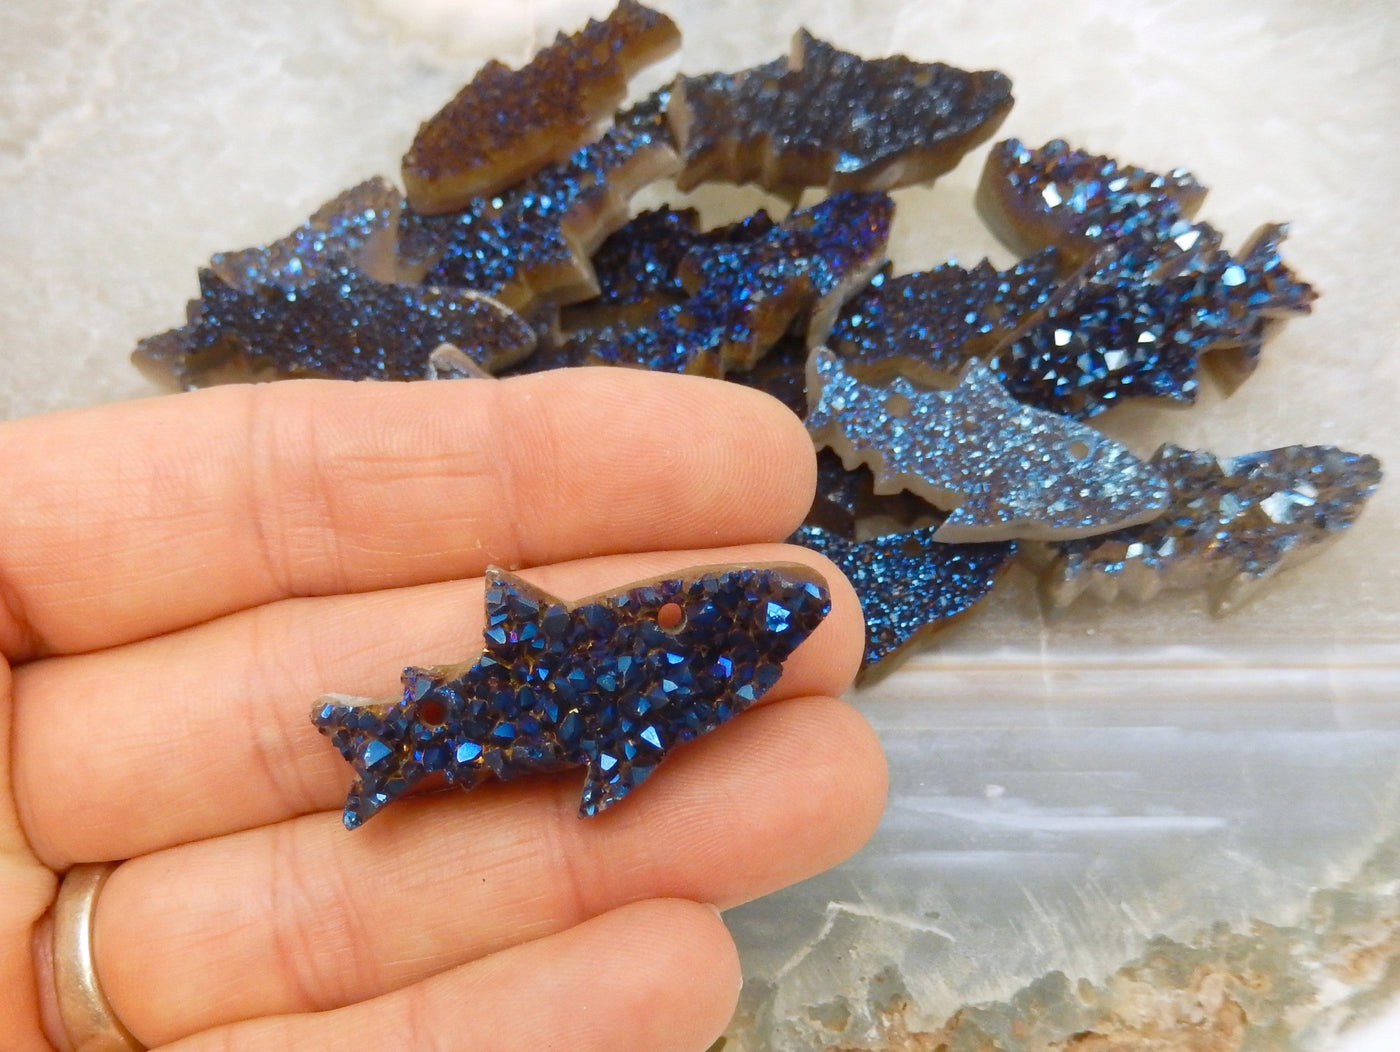 hand holding up Mystic Blue Shark Fish Cluster Cabochon with others in the background